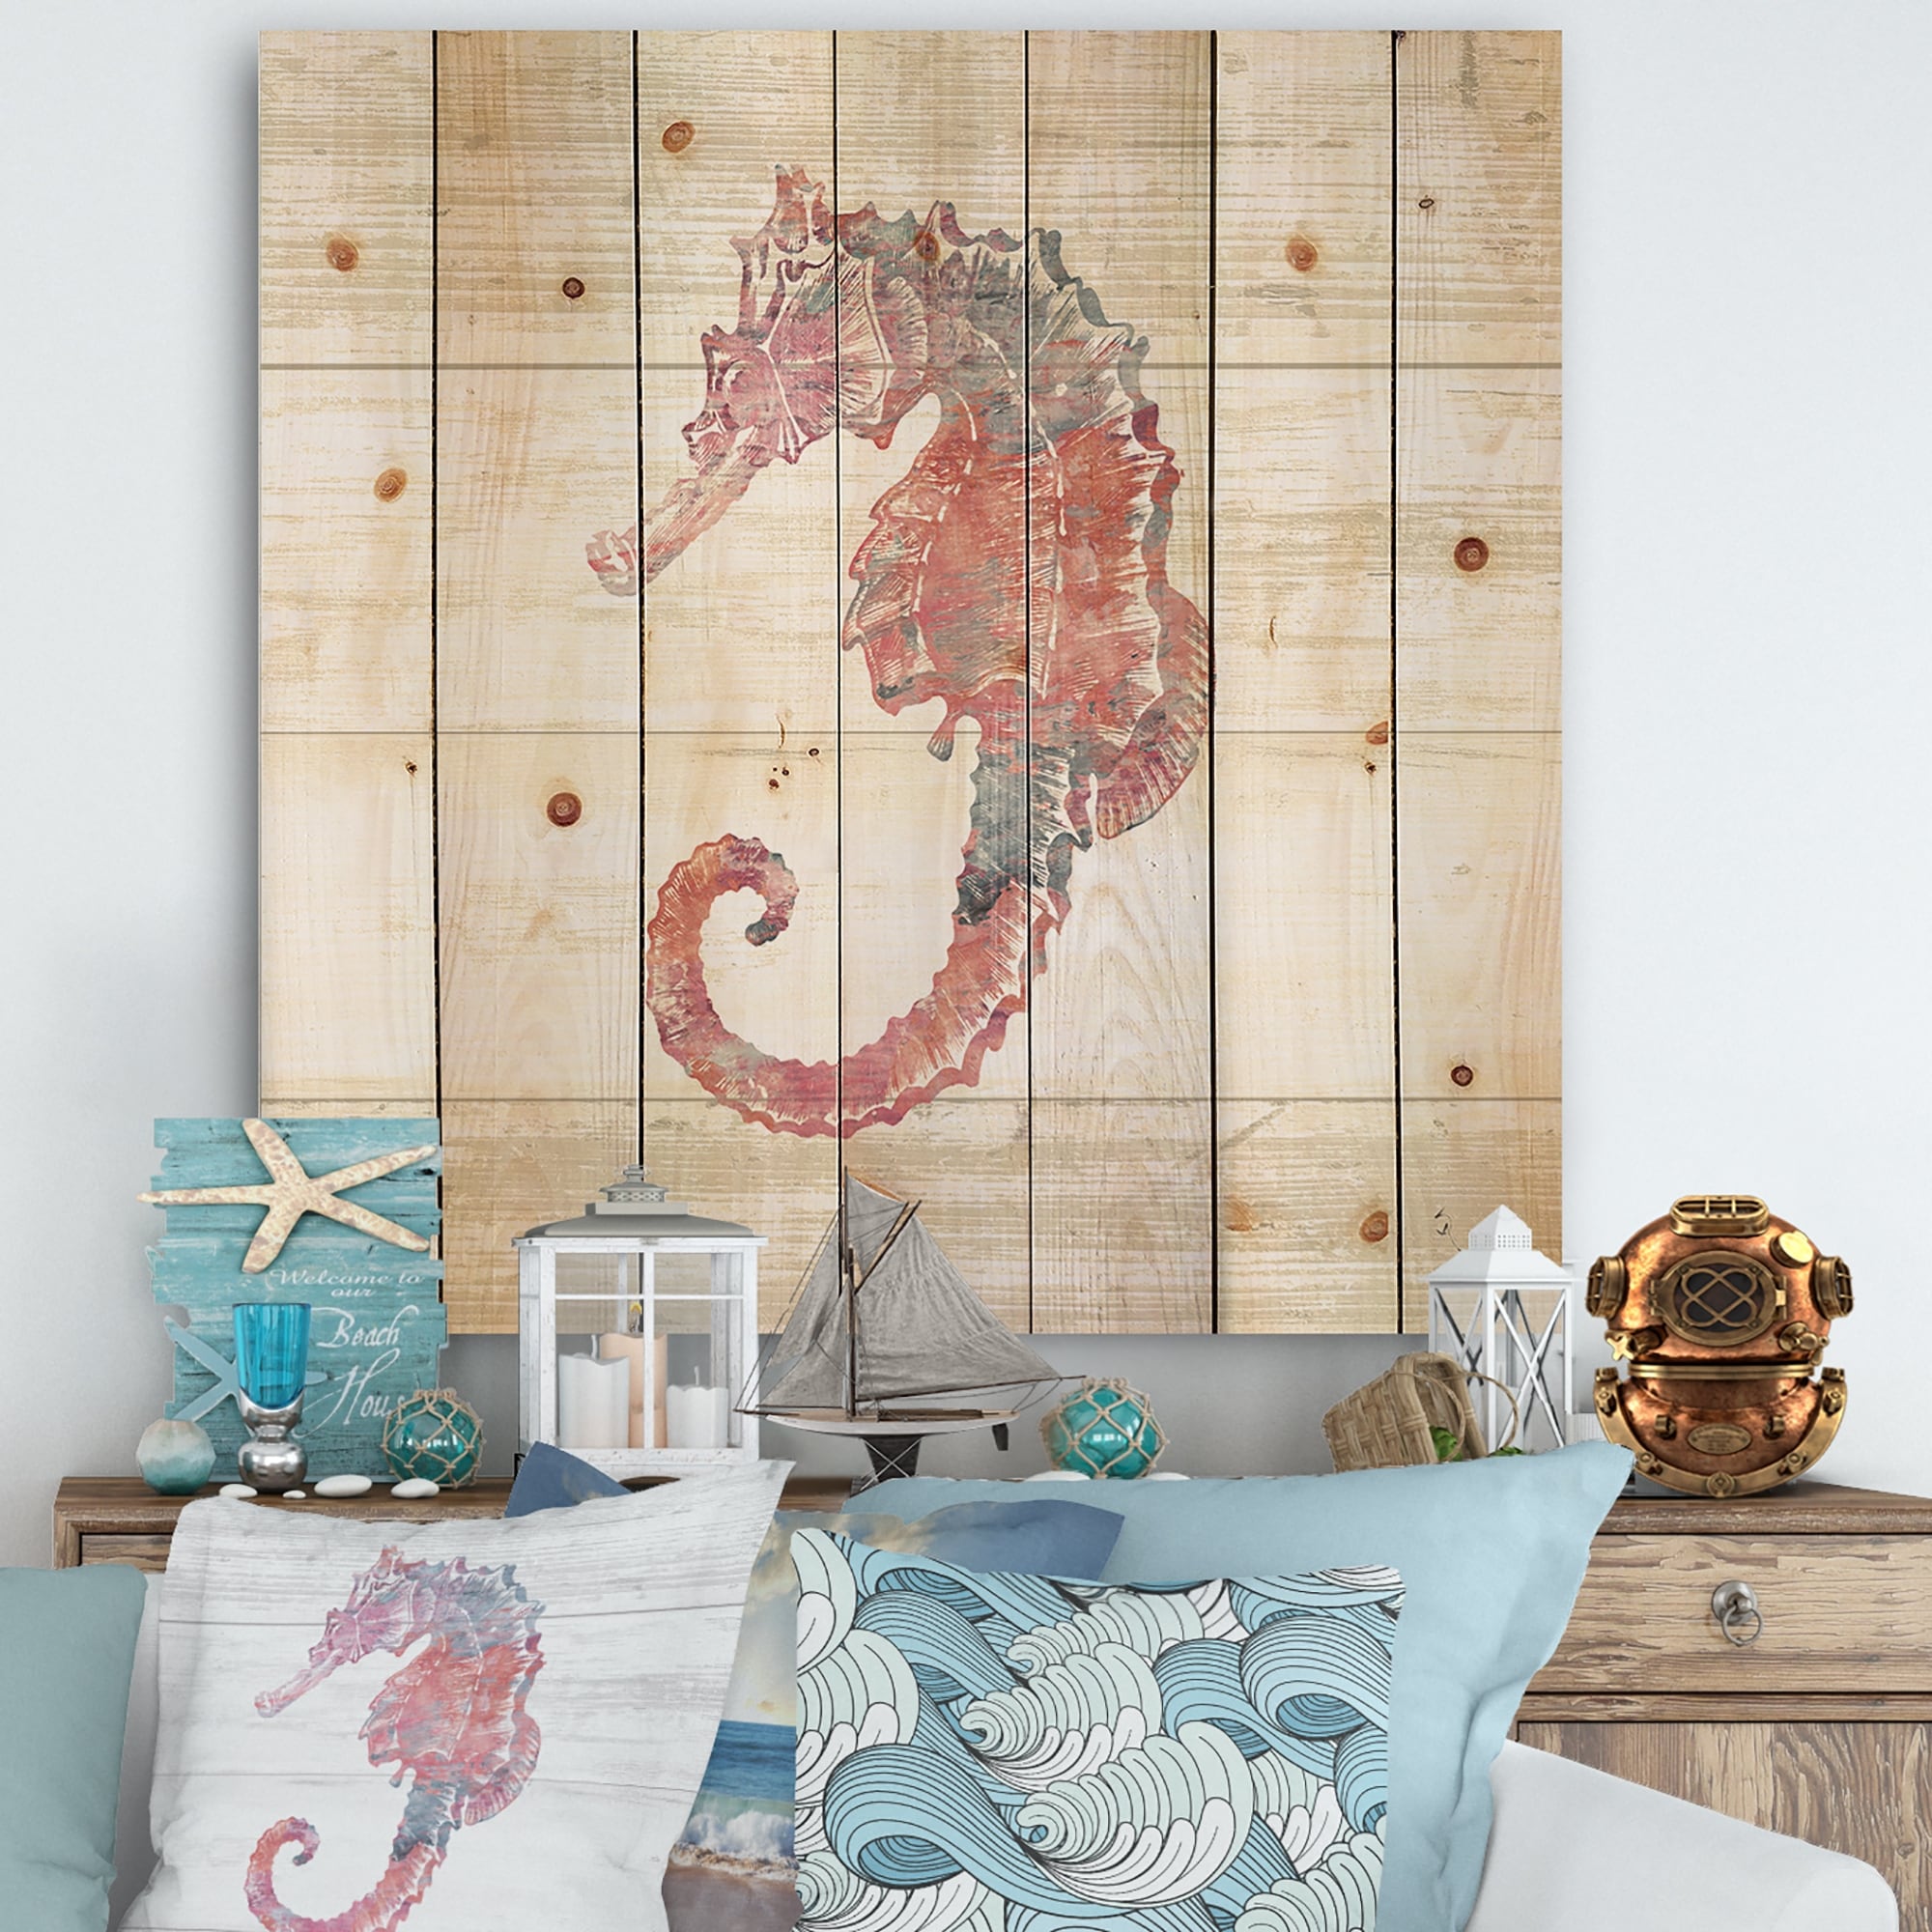 https://ak1.ostkcdn.com/images/products/is/images/direct/9829be28f1a5f35fa59ff7ff86757537f87b75ce/Designart-%27Pink-seahorses-Ocean-Life%27-Nautical-%26-Coastal-Print-on-Natural-Pine-Wood.jpg